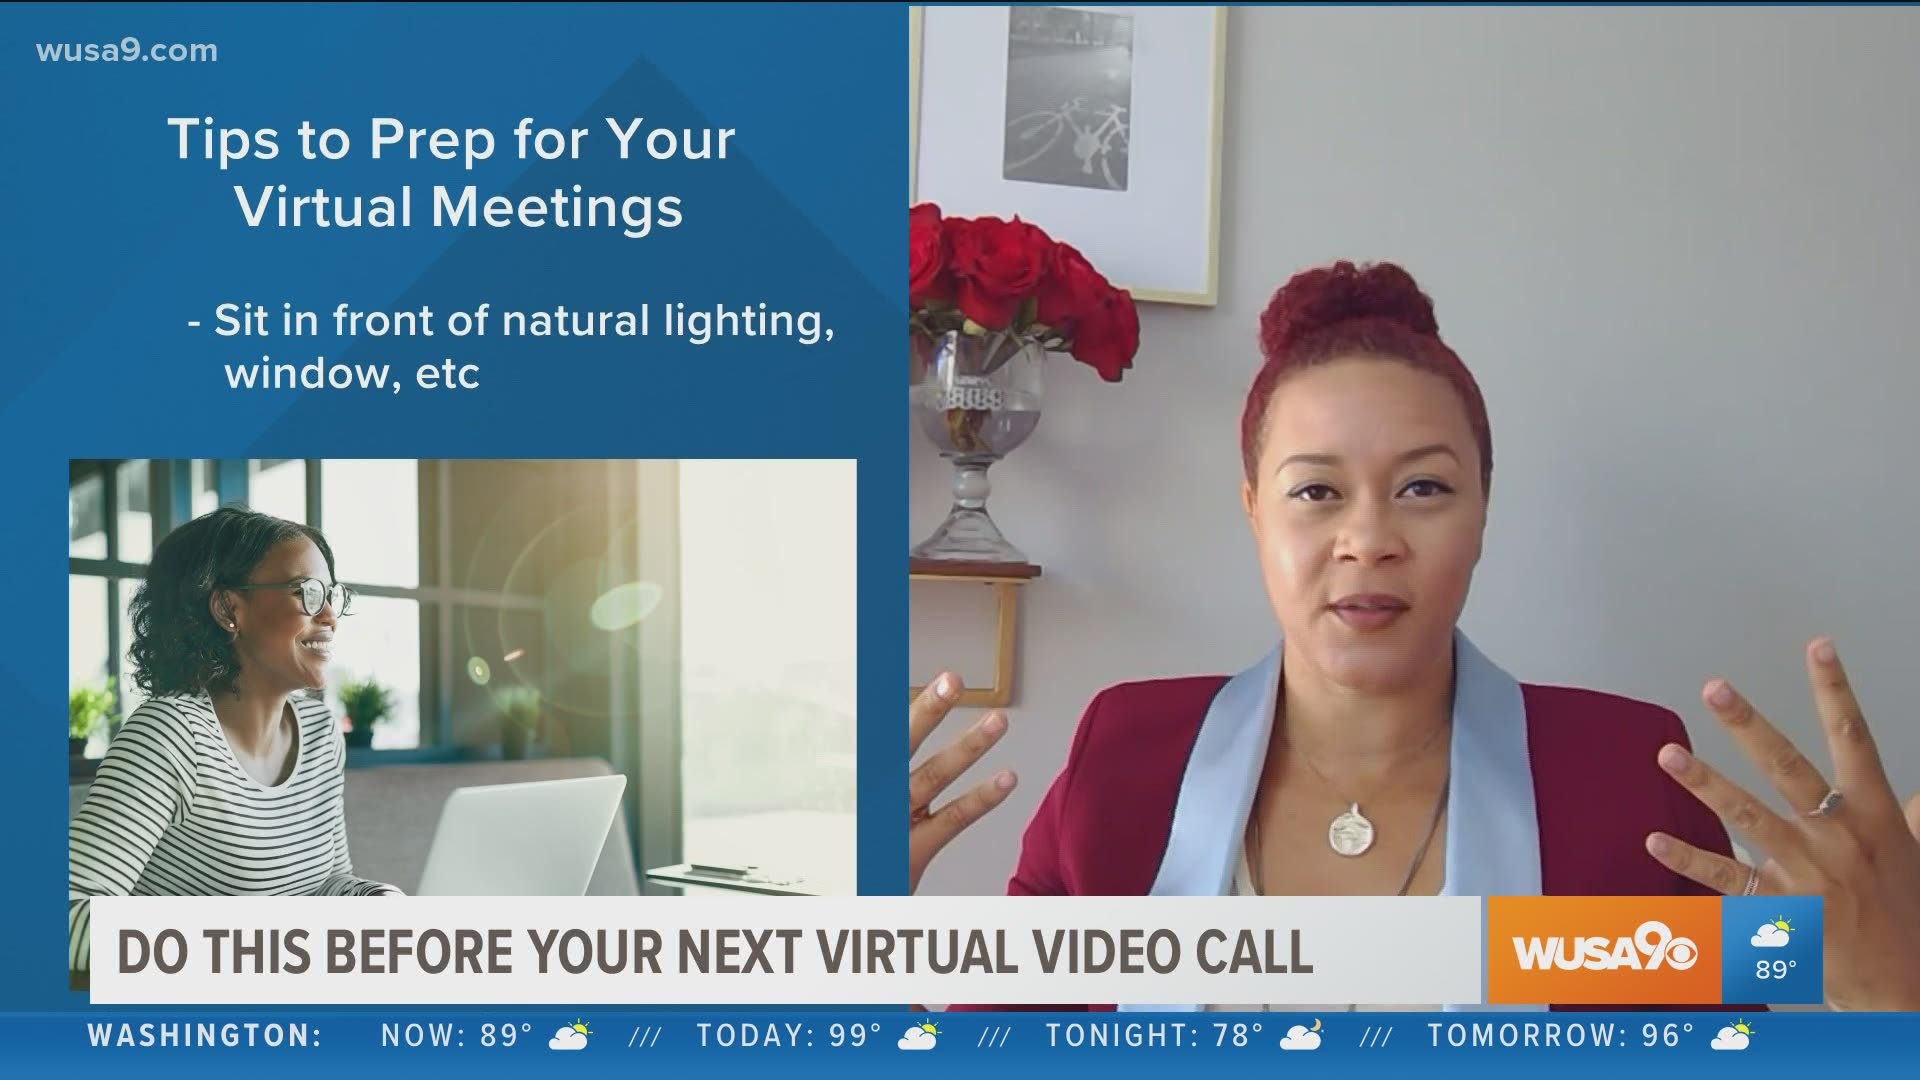 Fashion Architect JoJo St. Clair has some suggestions to help you look your best on a video call.